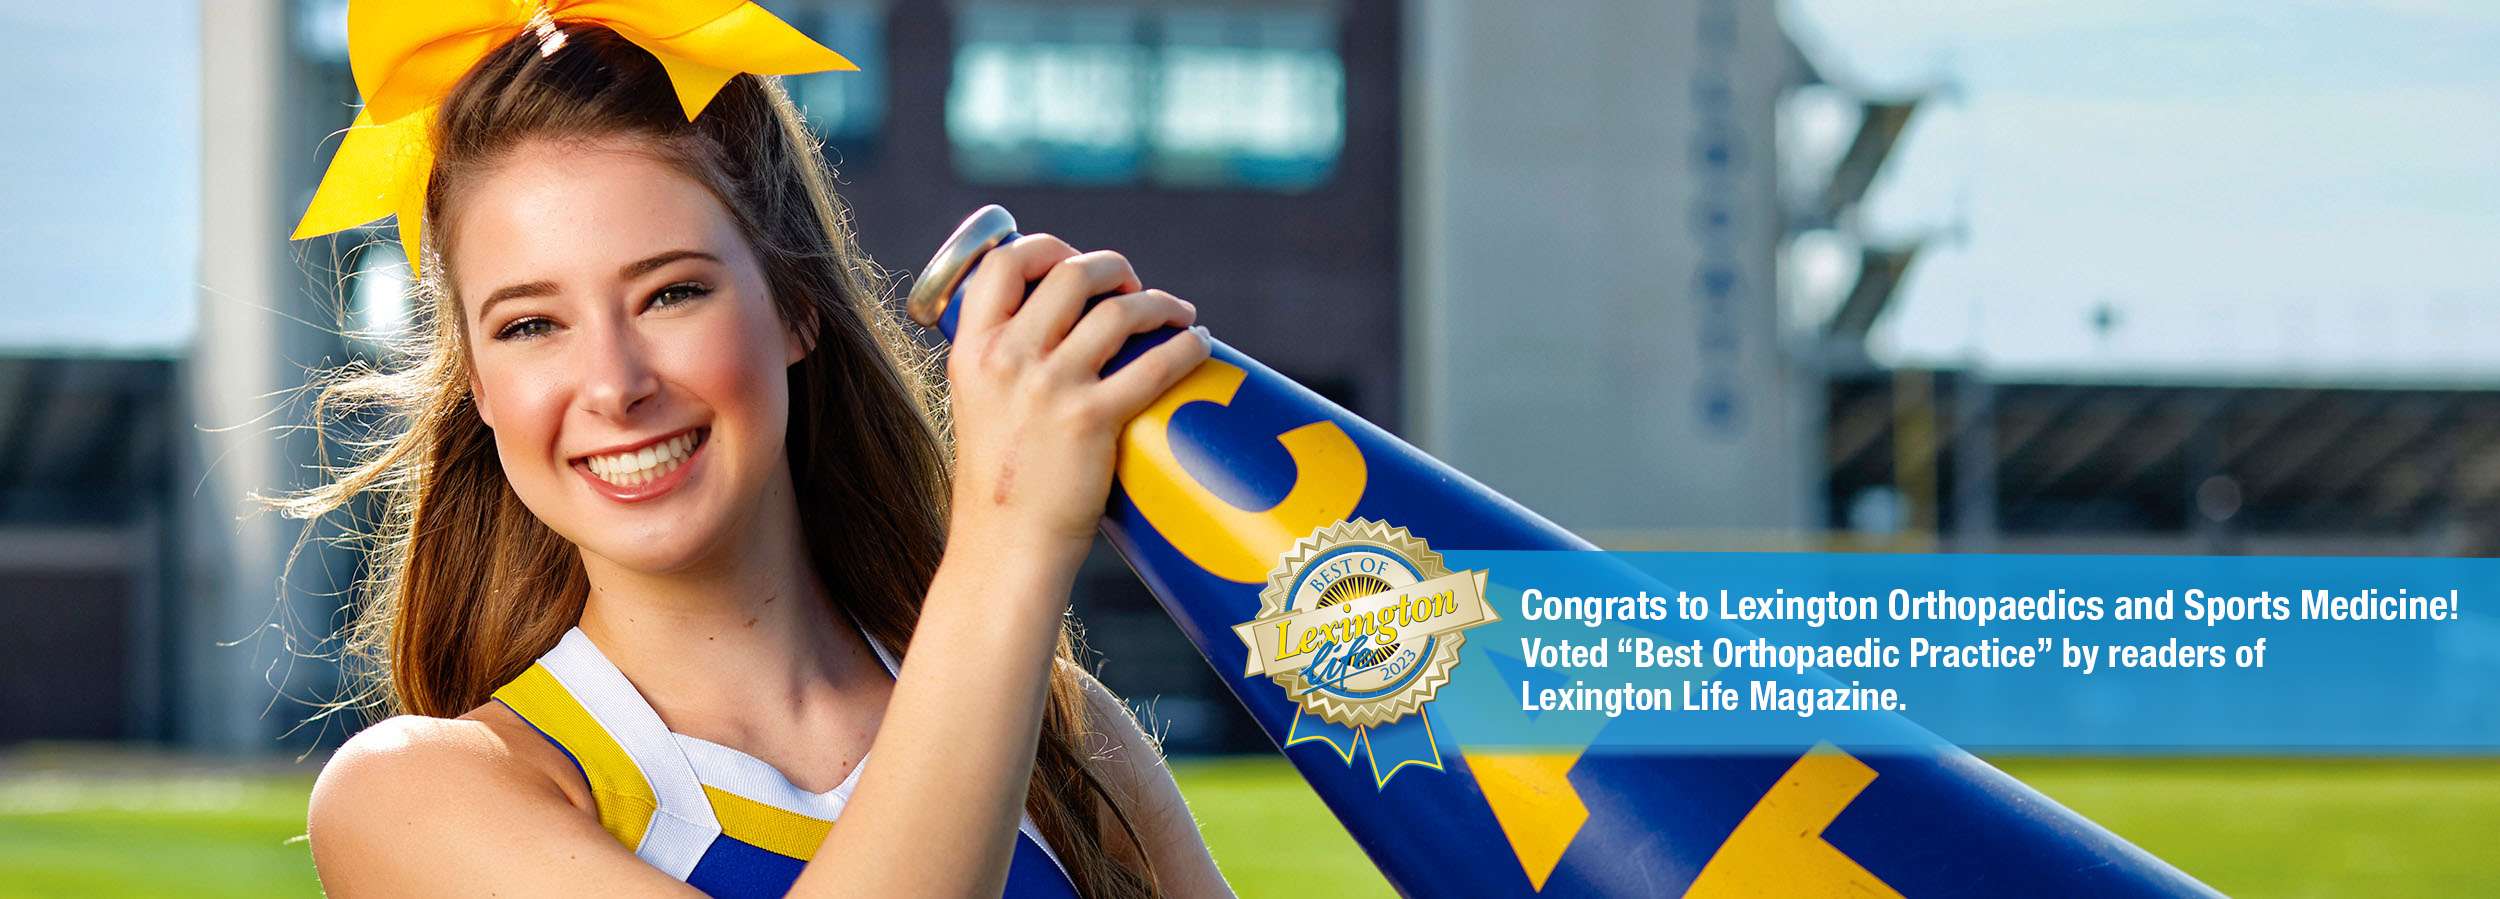 Hand injury patient Madison Kutyla in a cheer uniform holding up a megaphone on a football field.